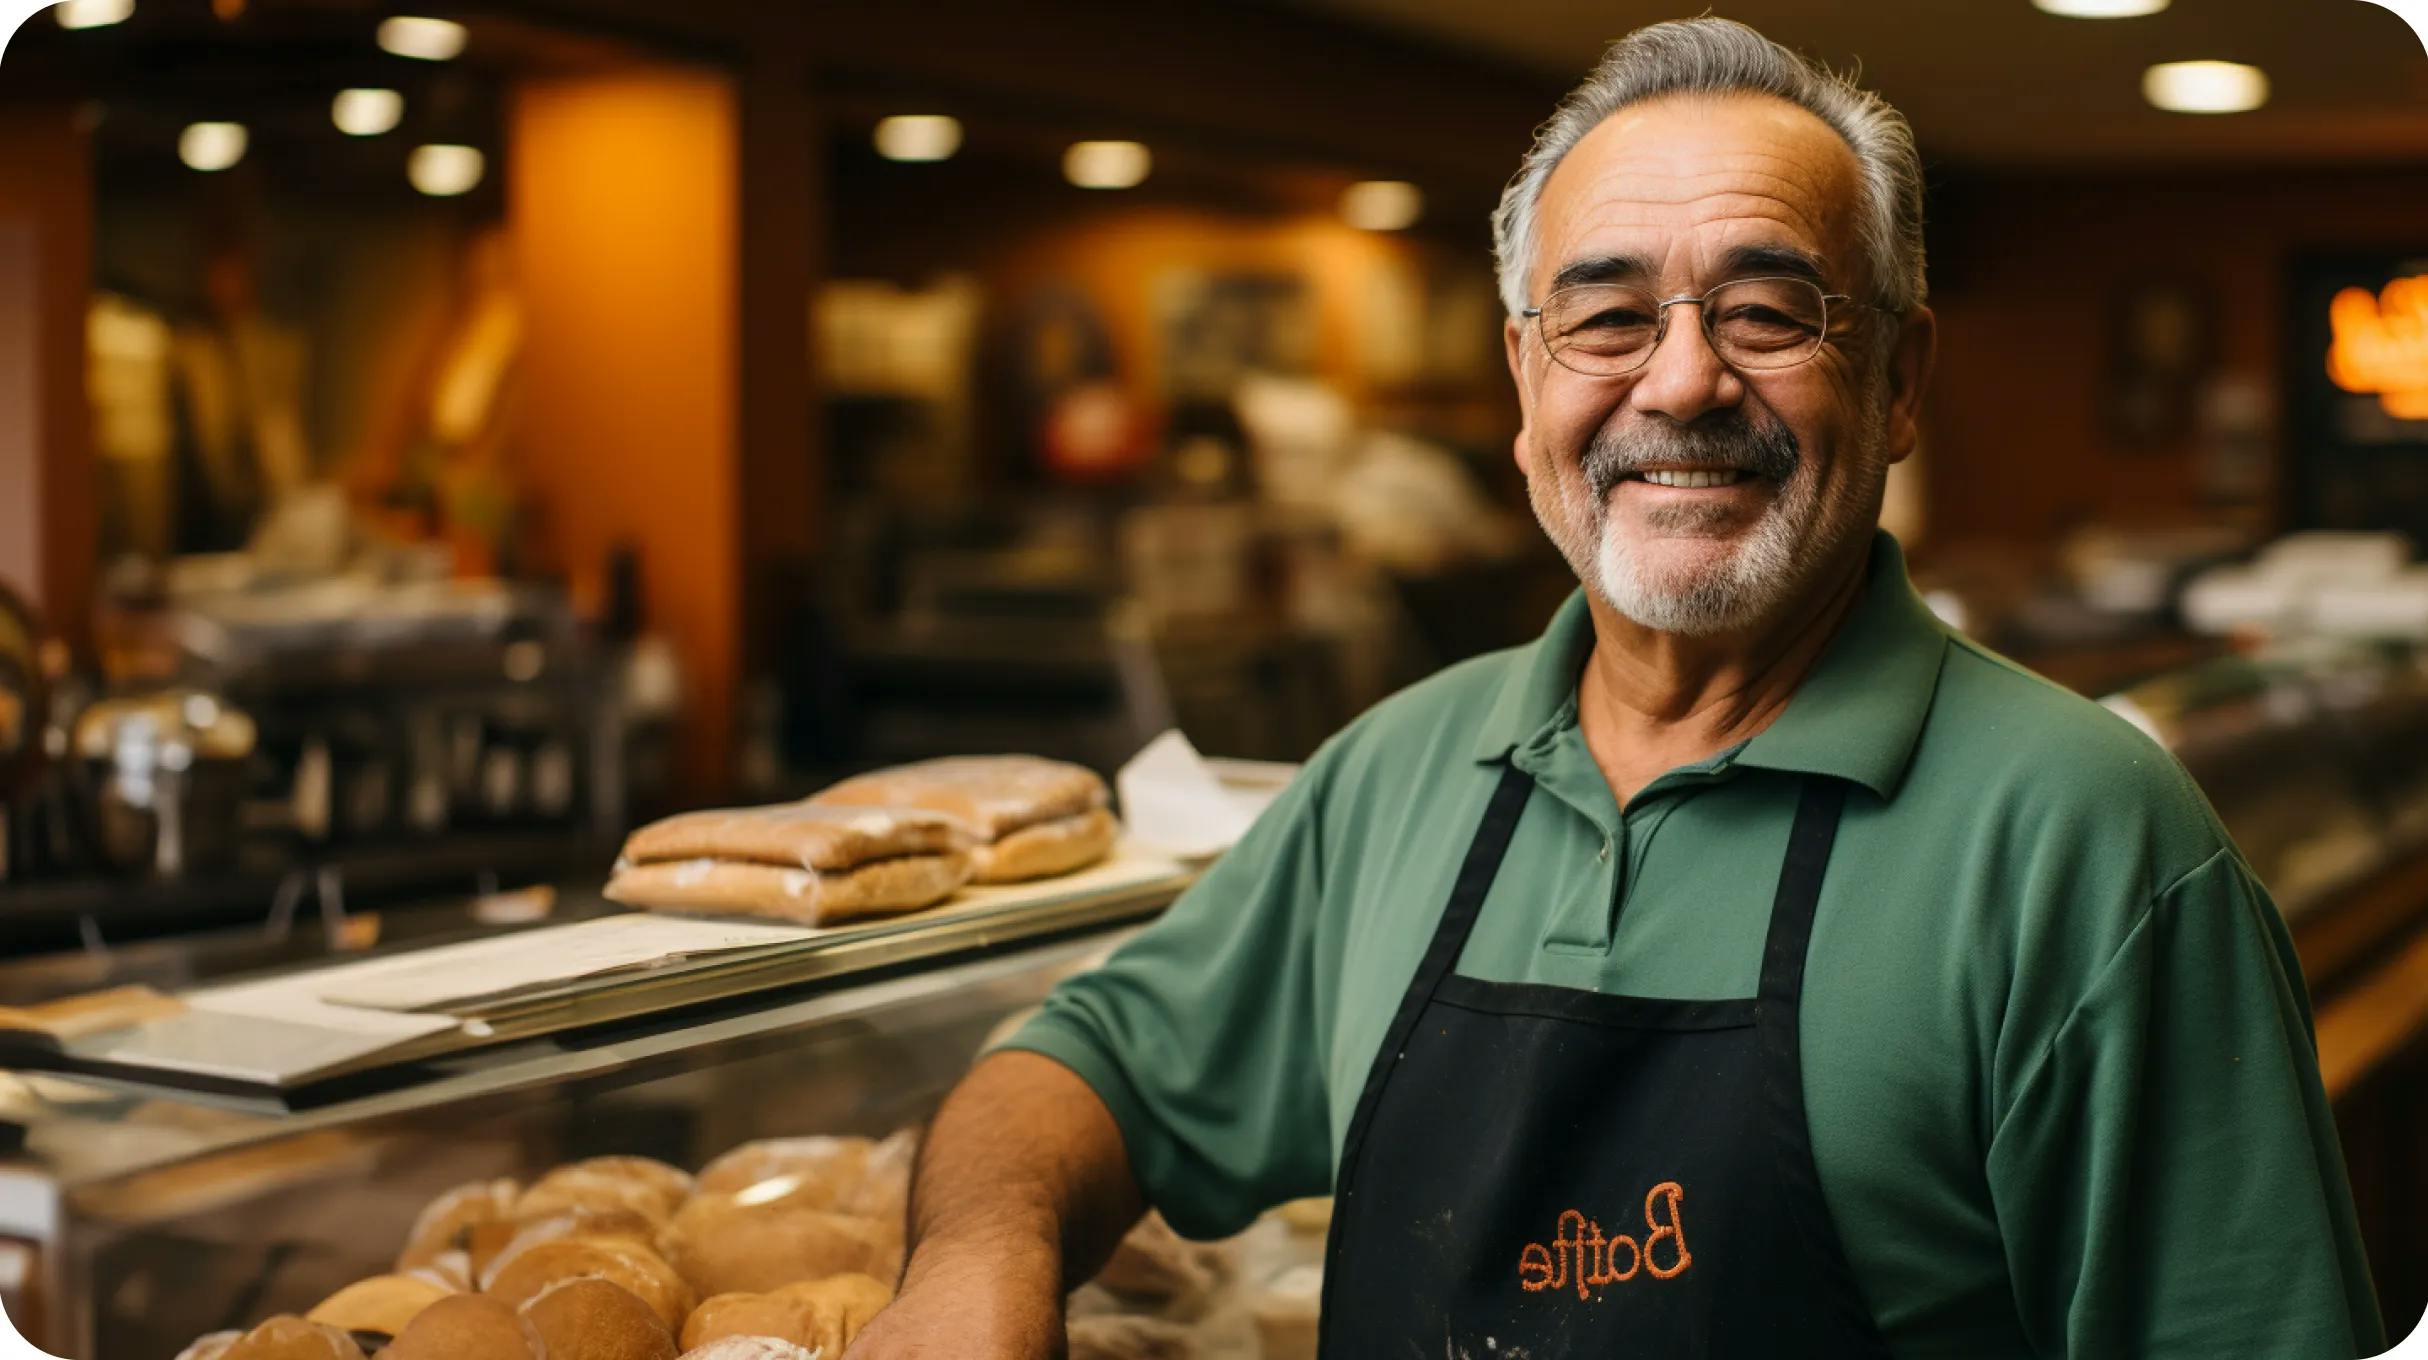 An old baker standing in a bakery